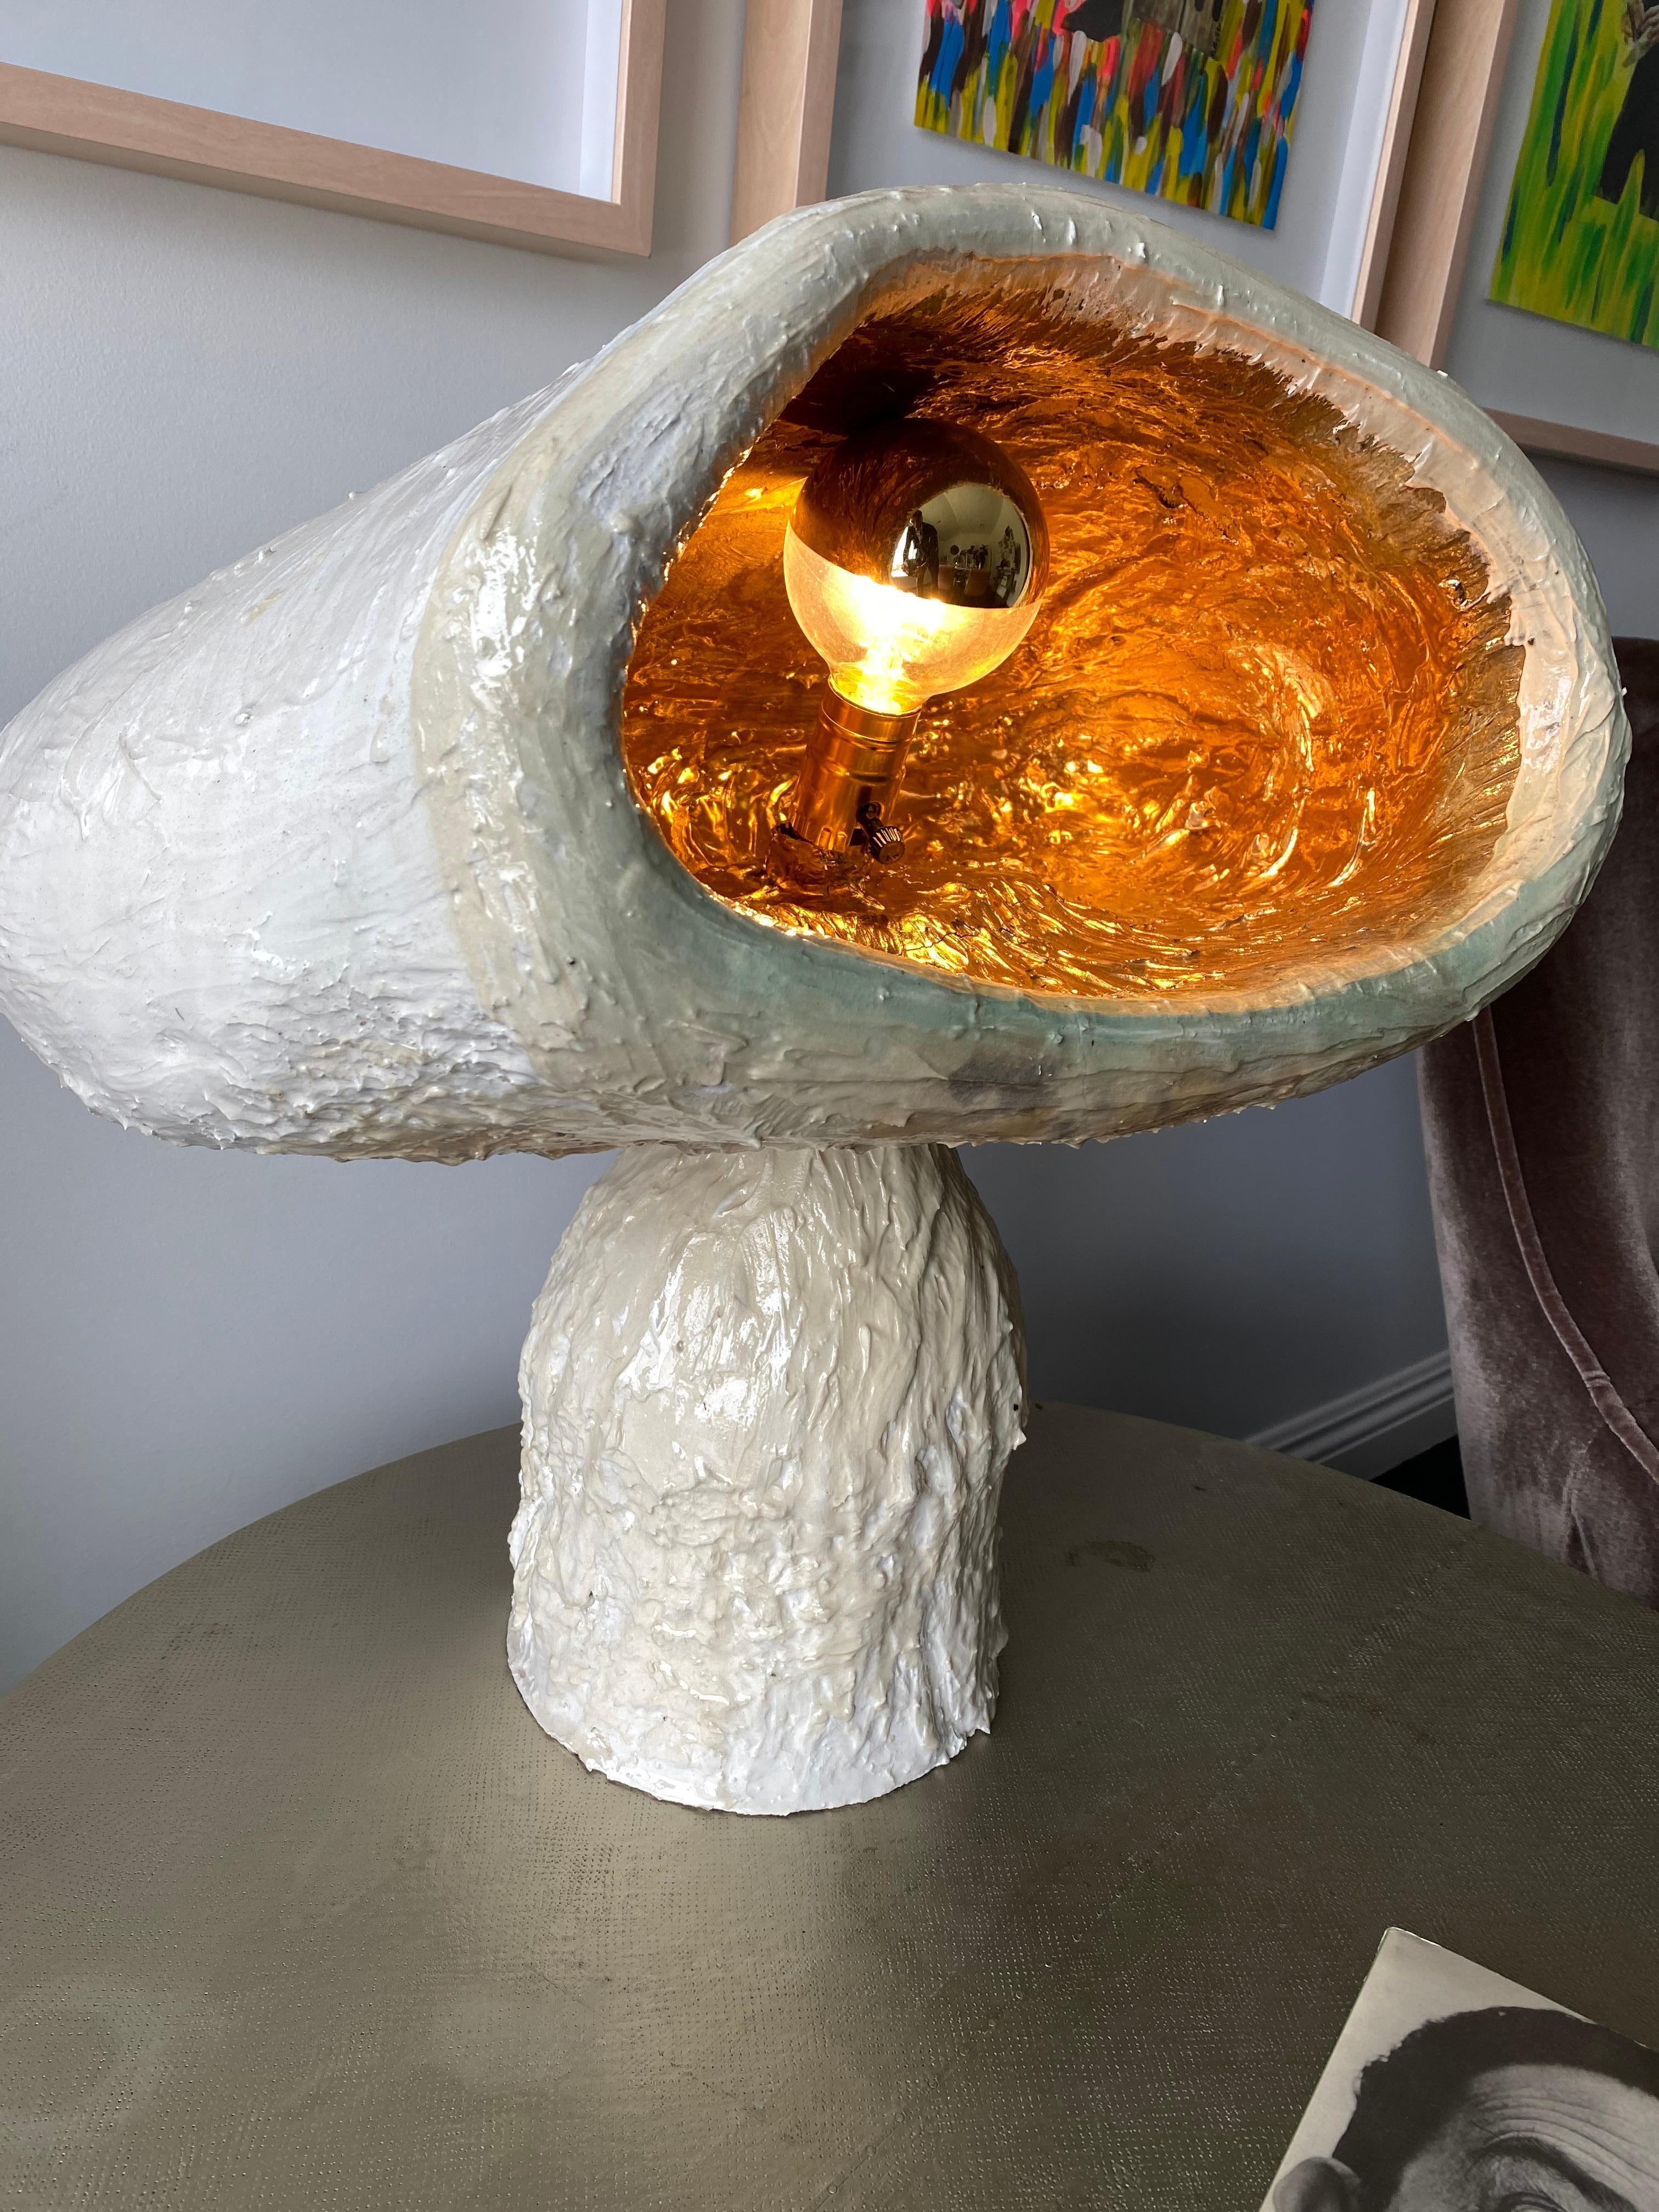 American White Gold Sculptural Plaster Table Lamp, 21st Century by Mattia Biagi For Sale